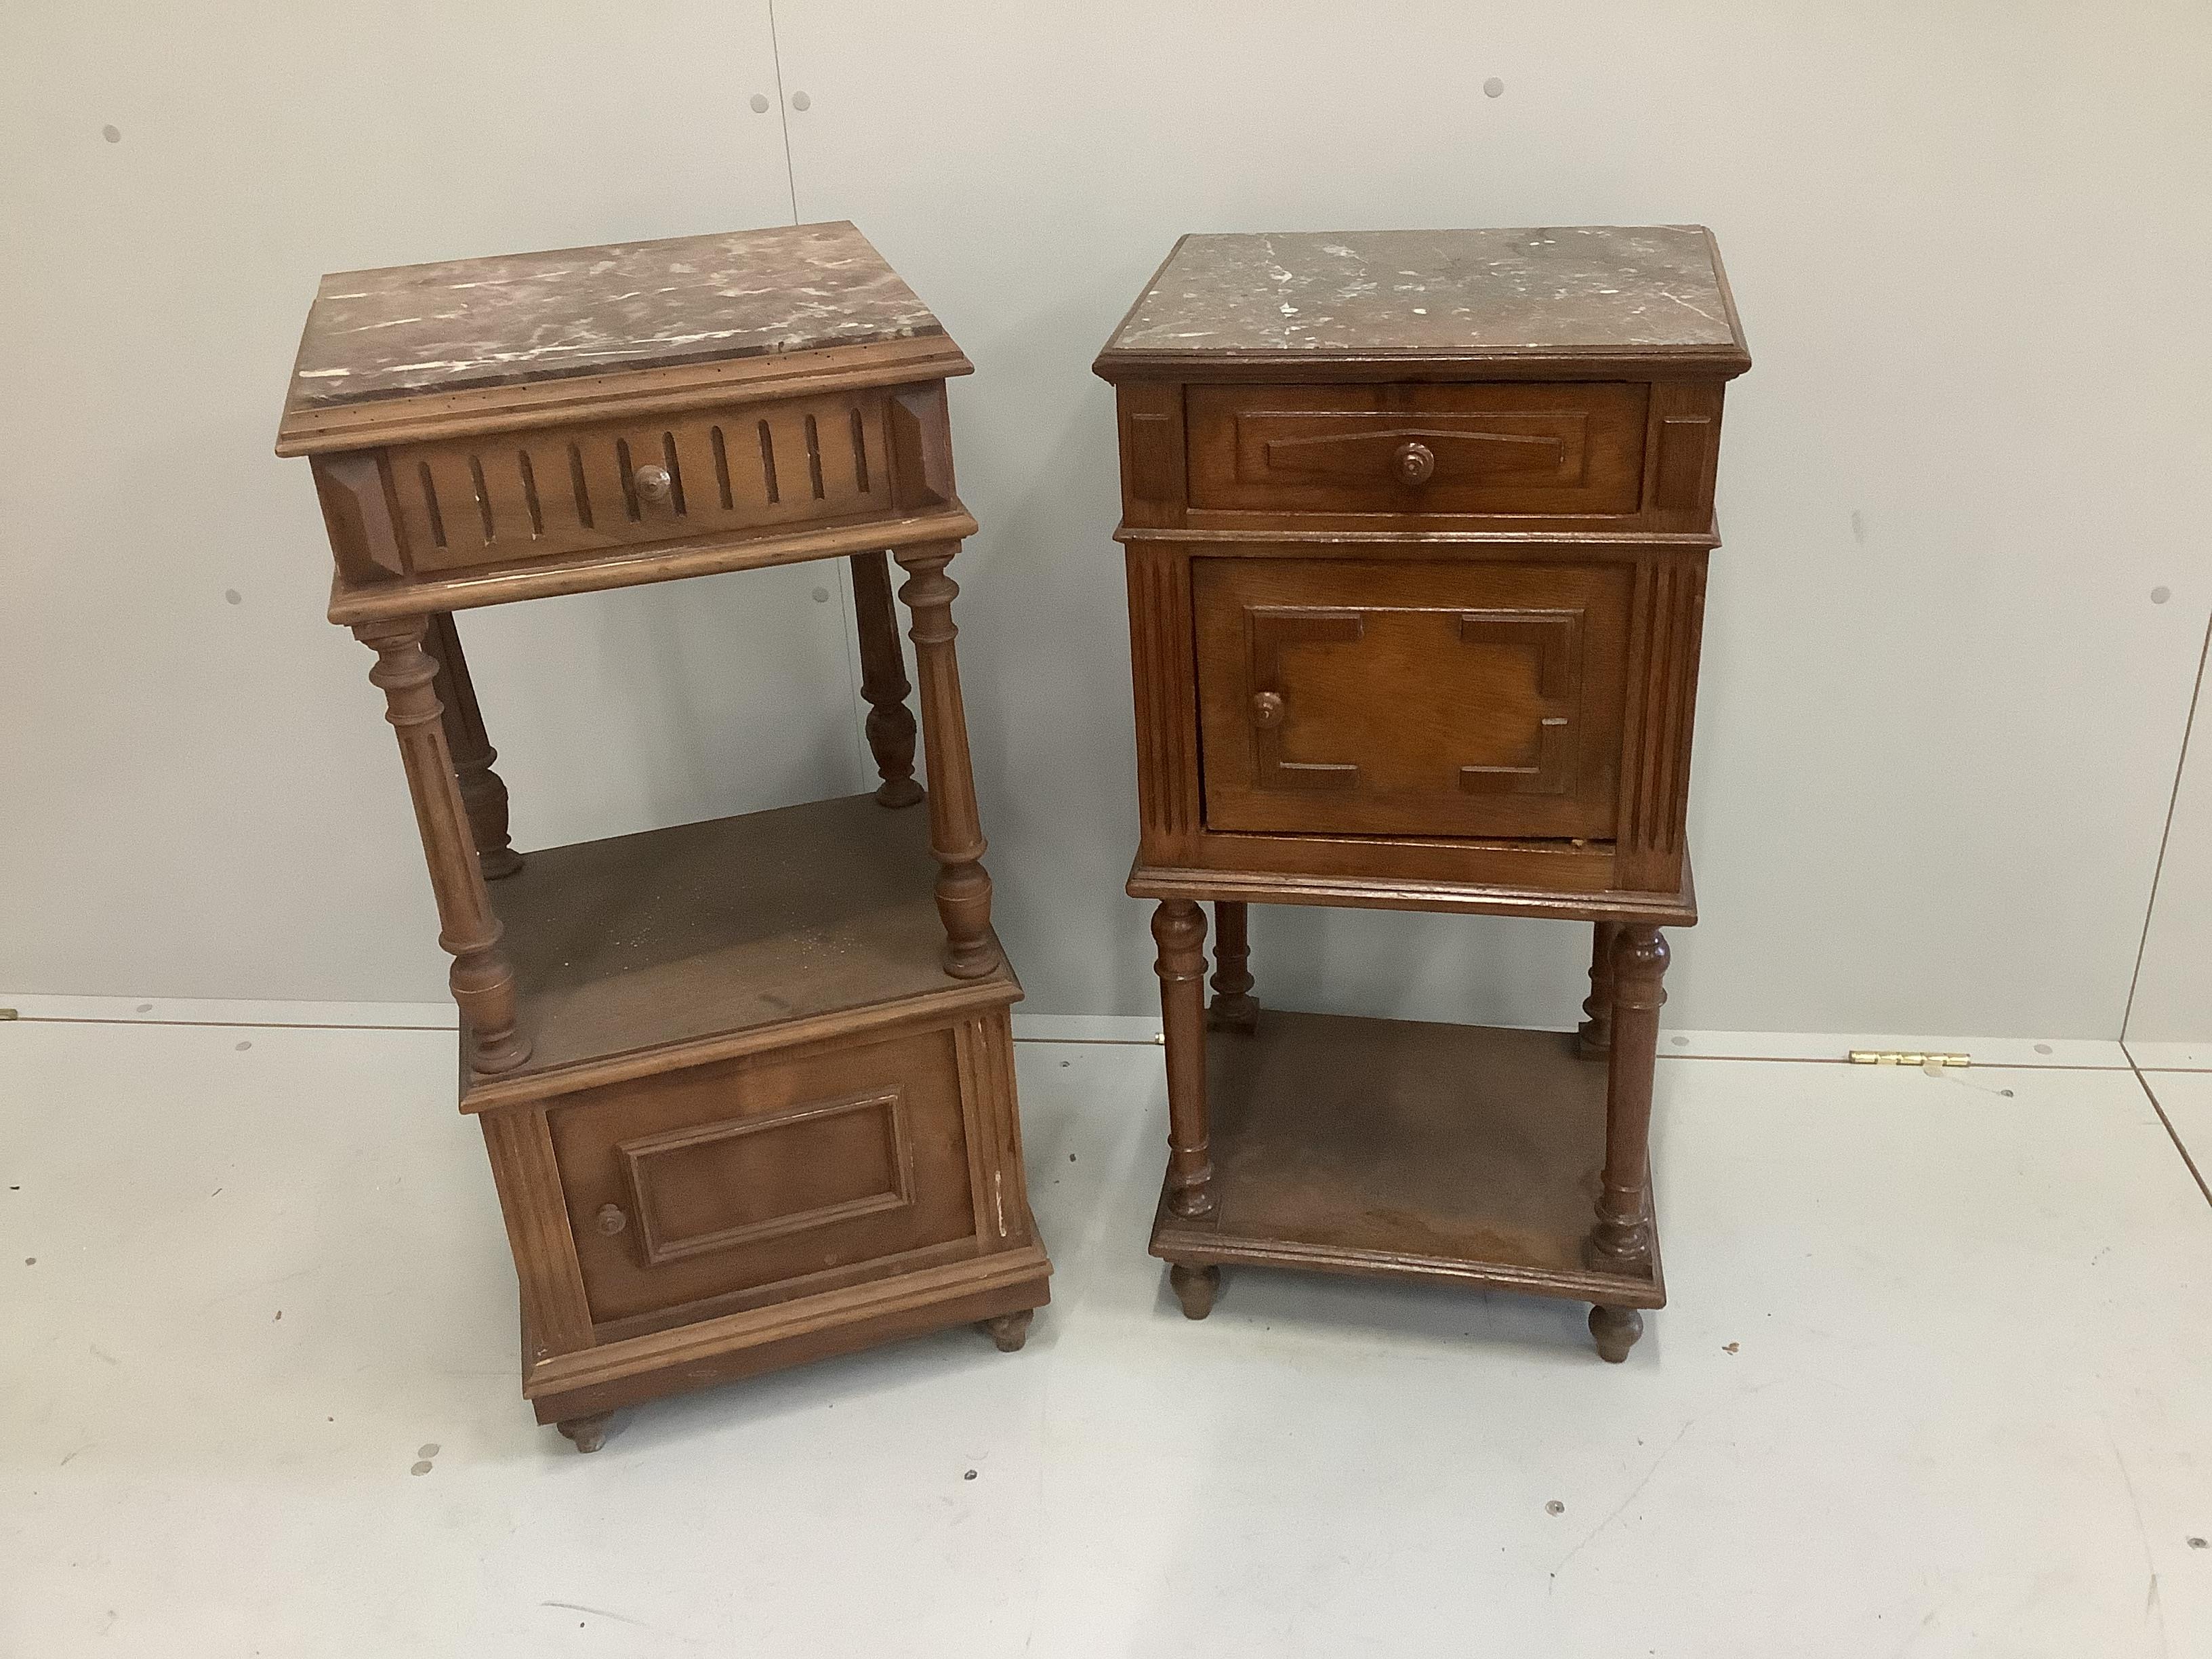 Two late 19th century French walnut bedside chests with marble tops